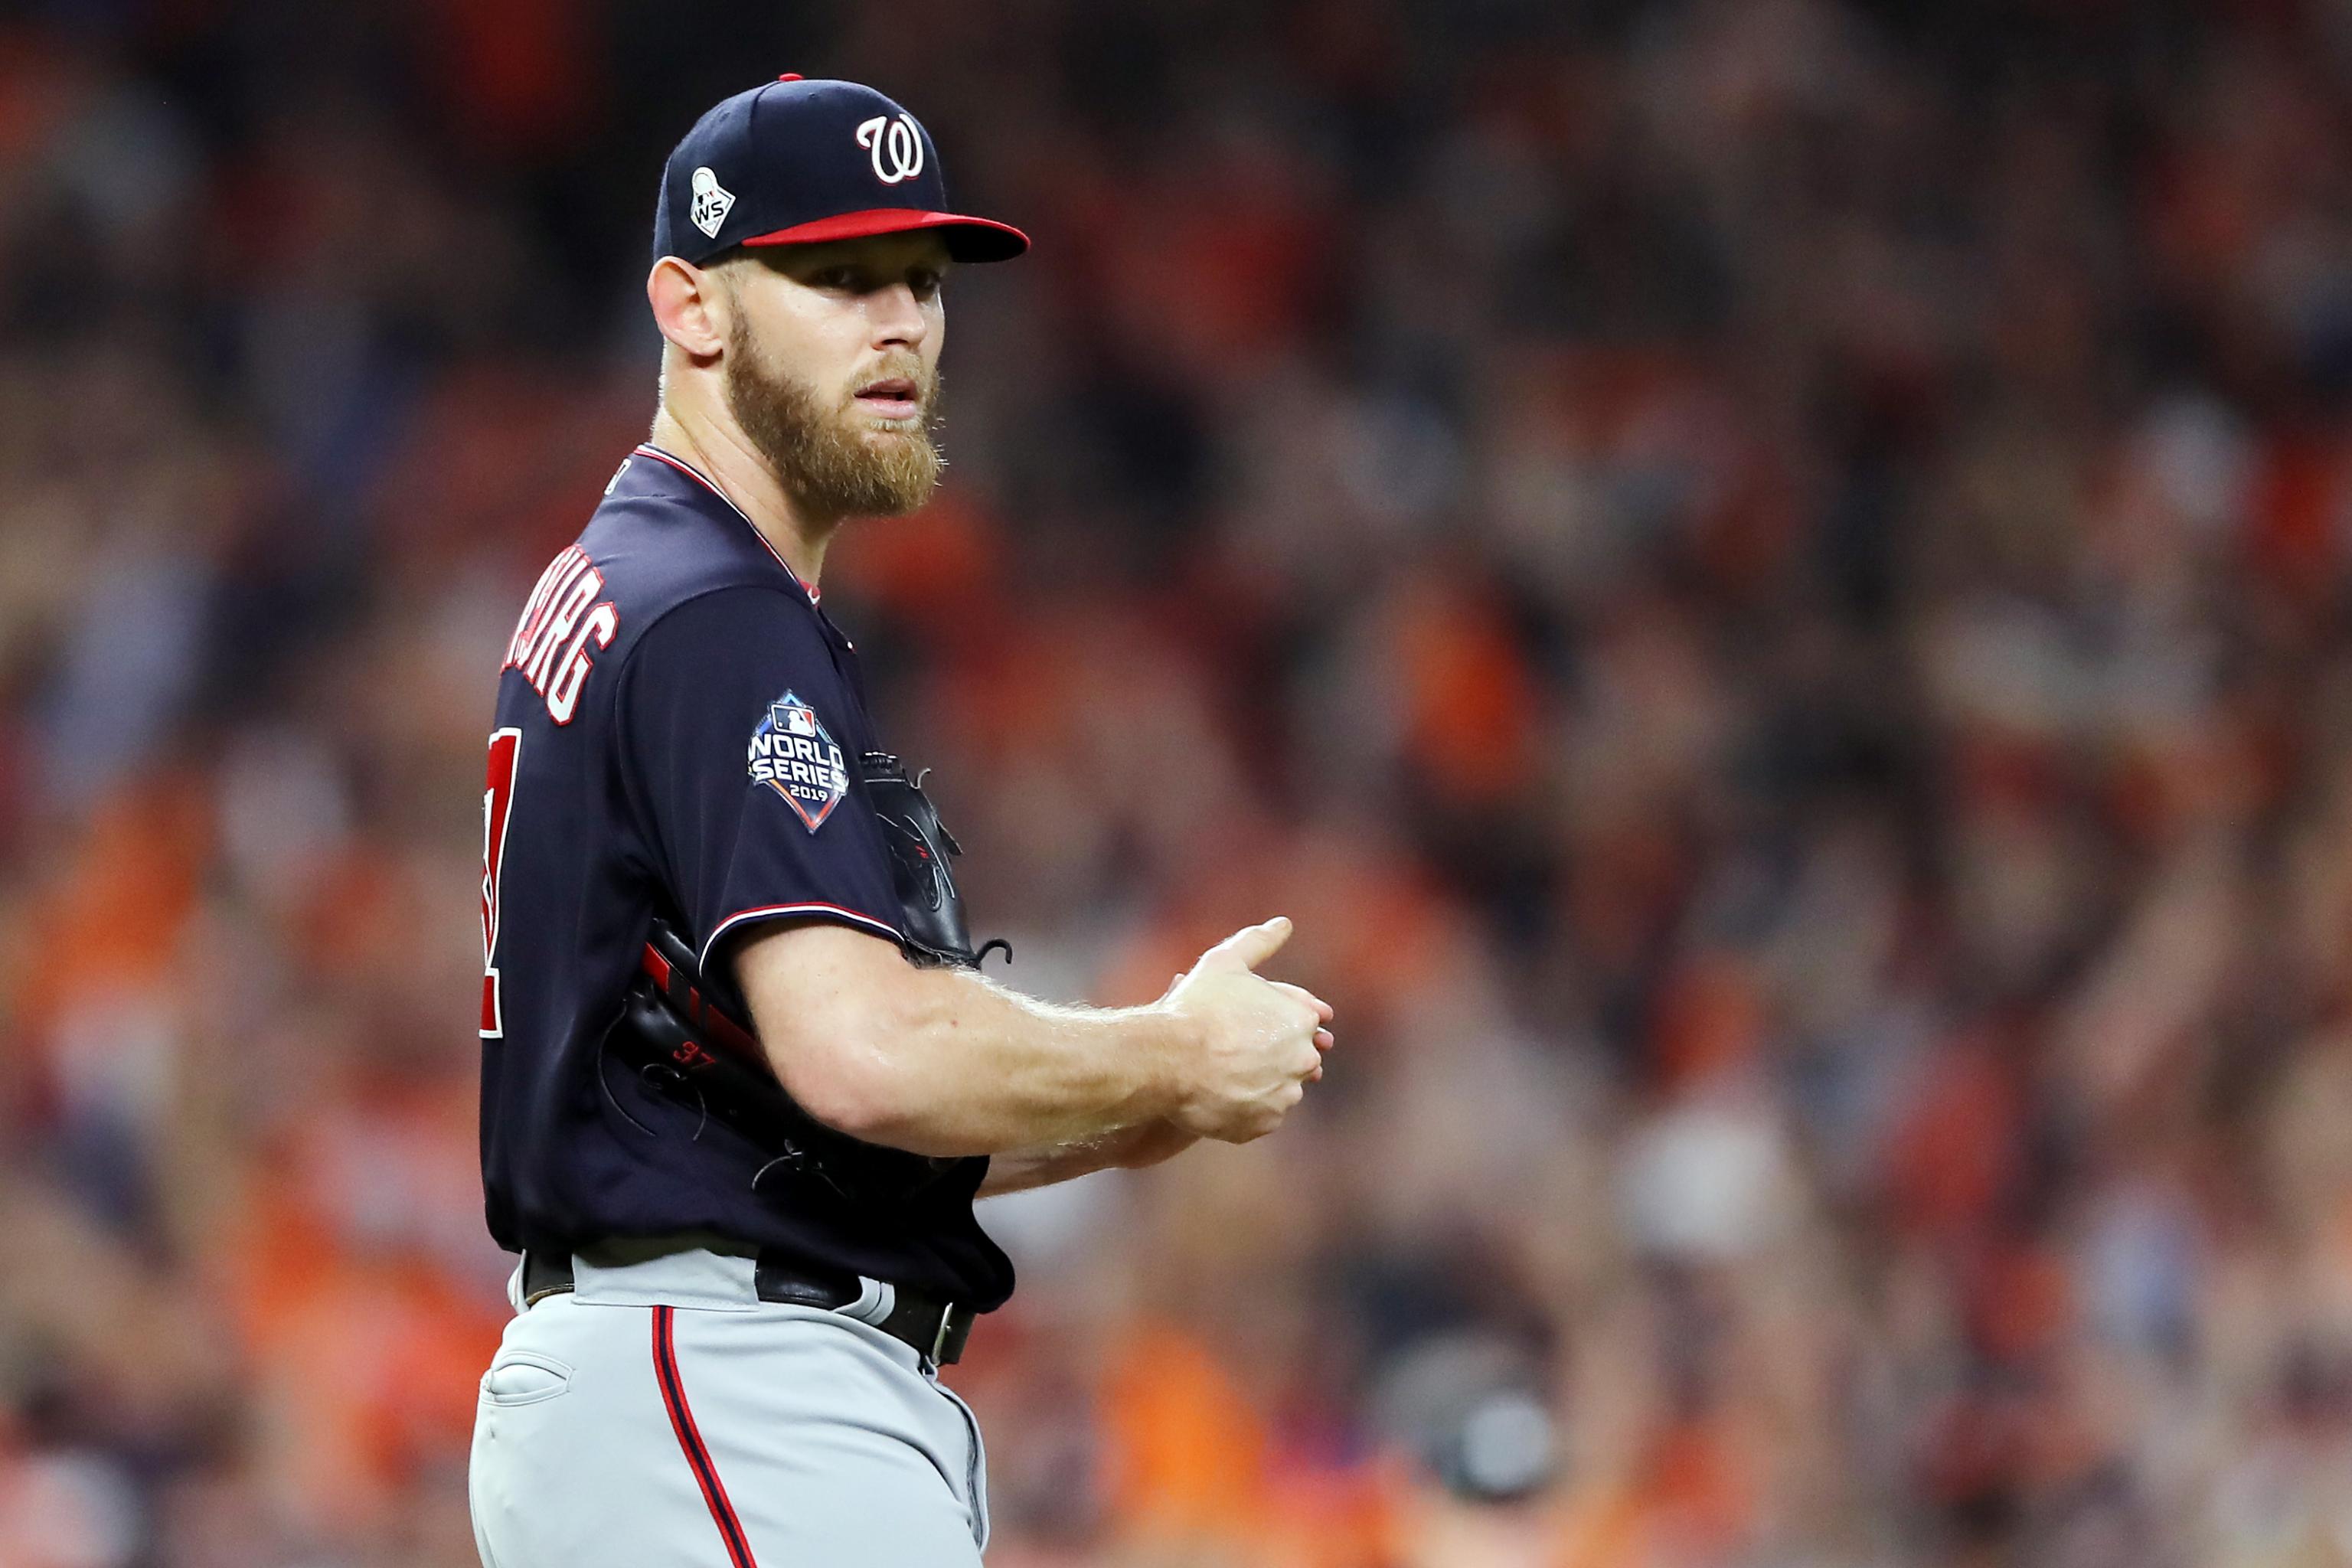 Stephen Strasburg Wins Second Start, Goes Home to Wife